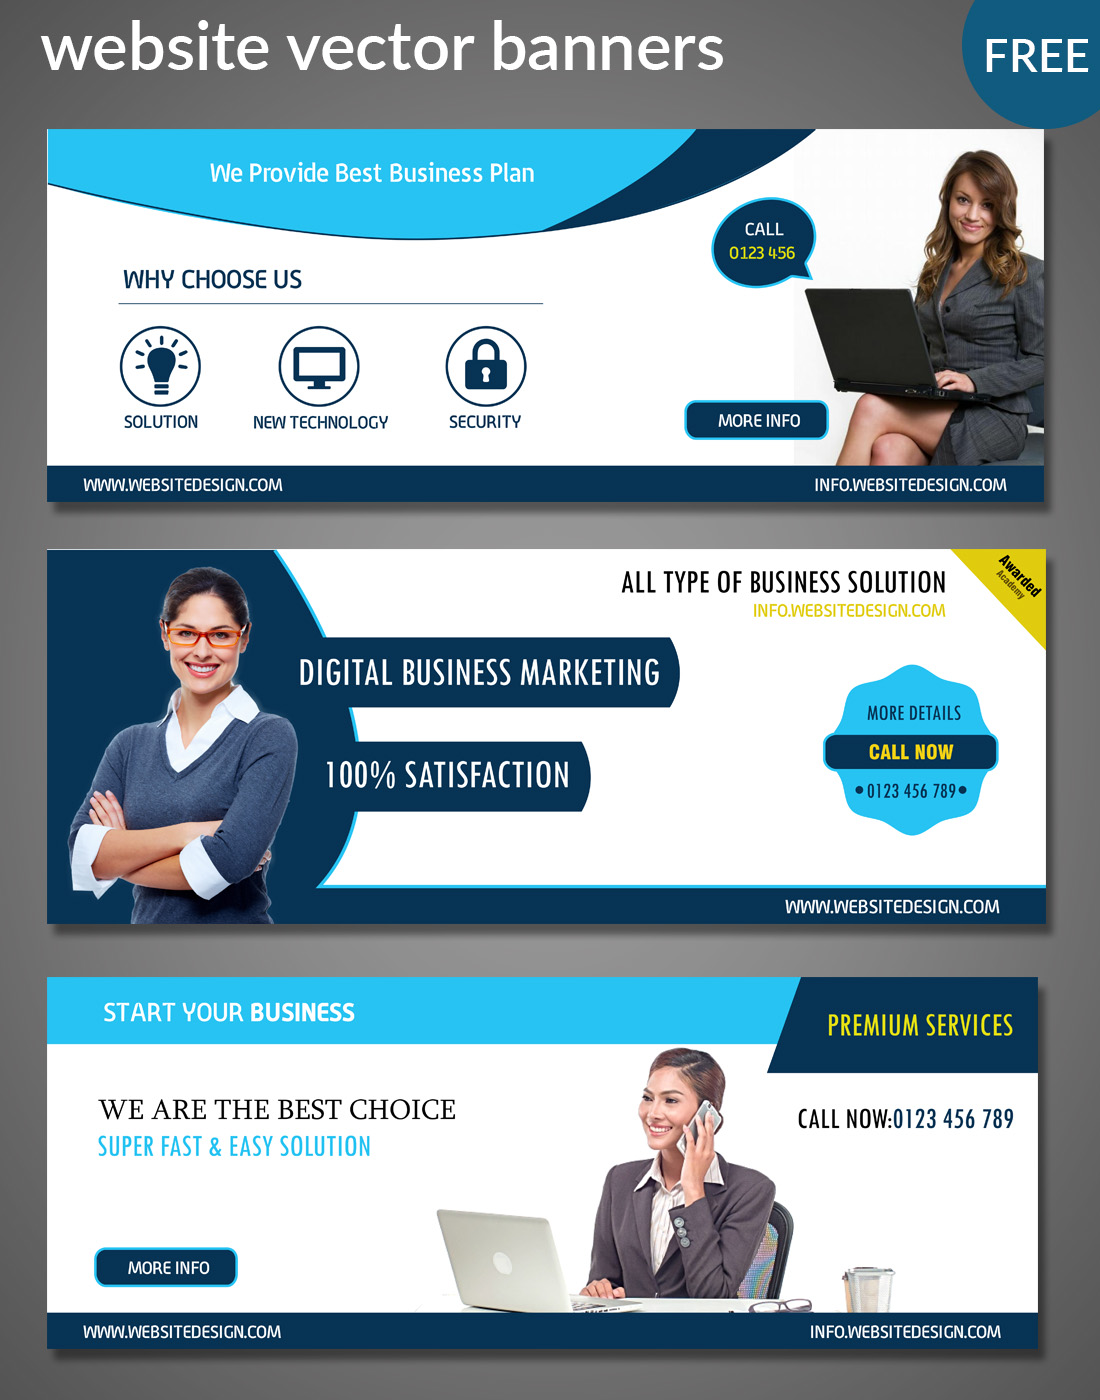 website banners templates Pertaining To Free Website Banner Templates Download